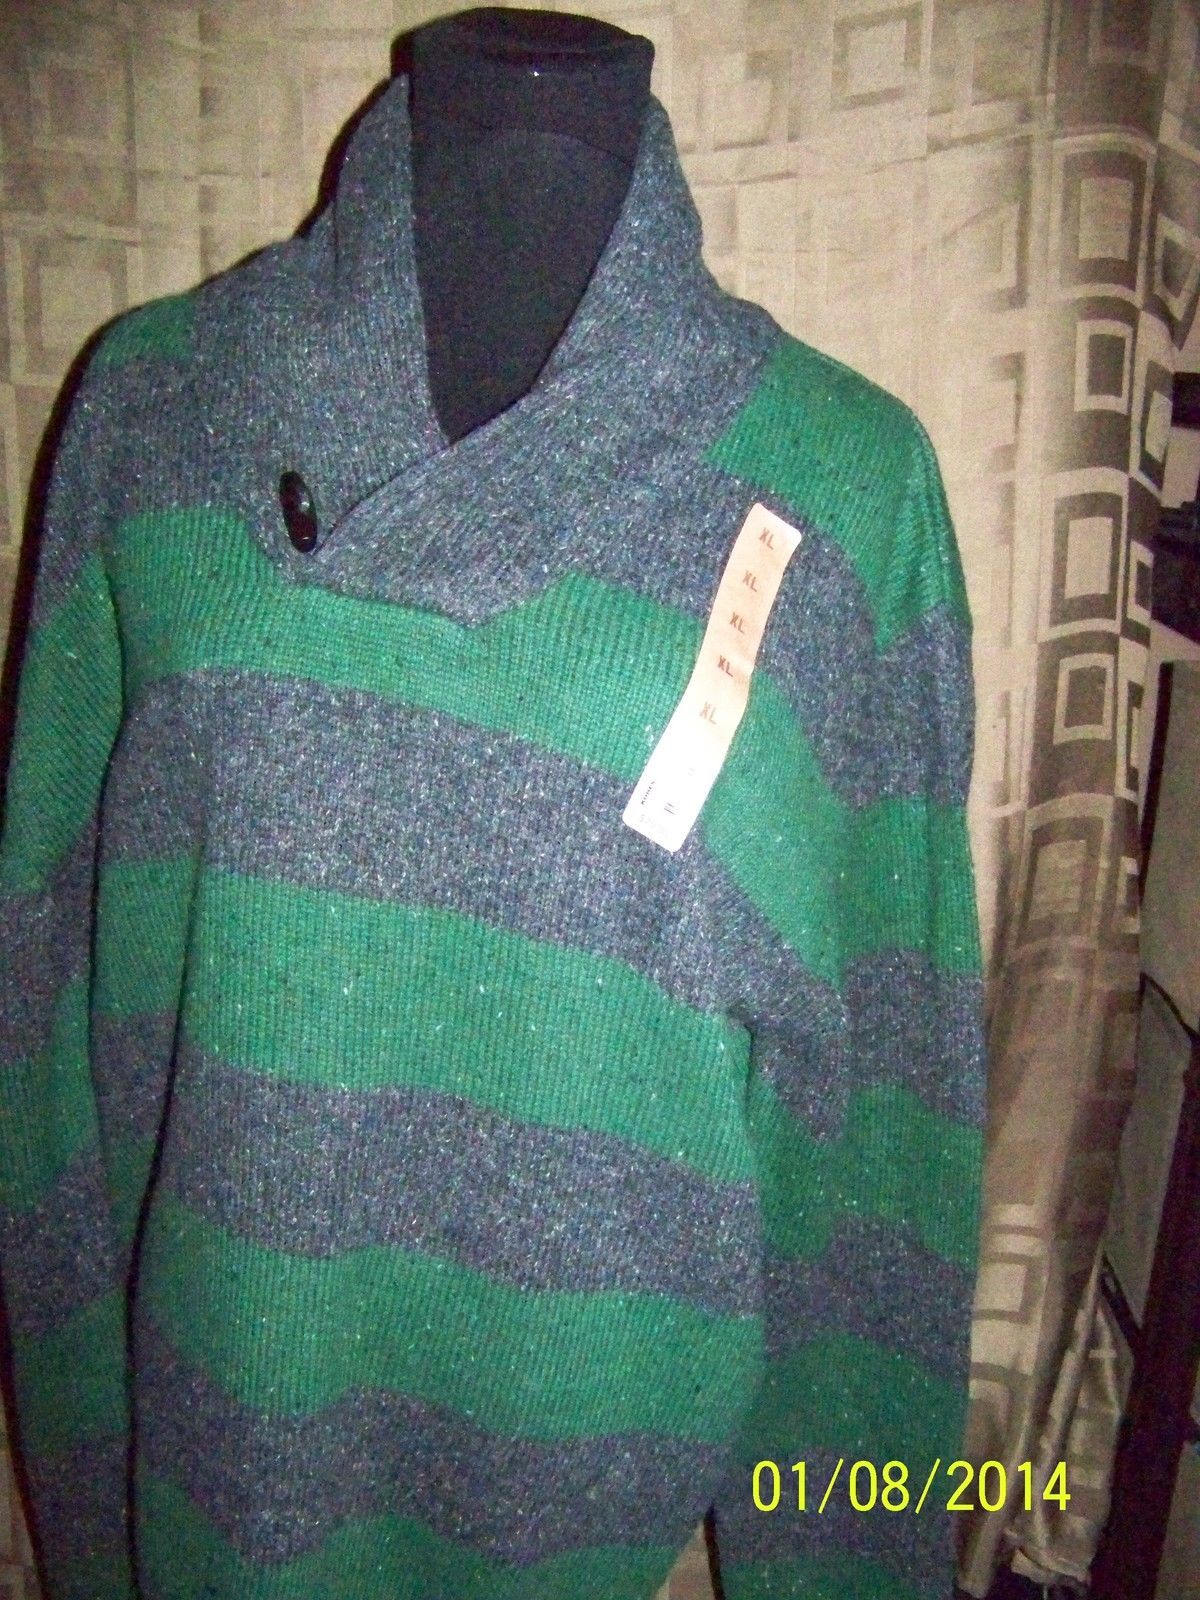 Nautica Acrylic Cable Knit Dark Teal Sweater Sizes M,L,XL and XXL NWT Retail $98